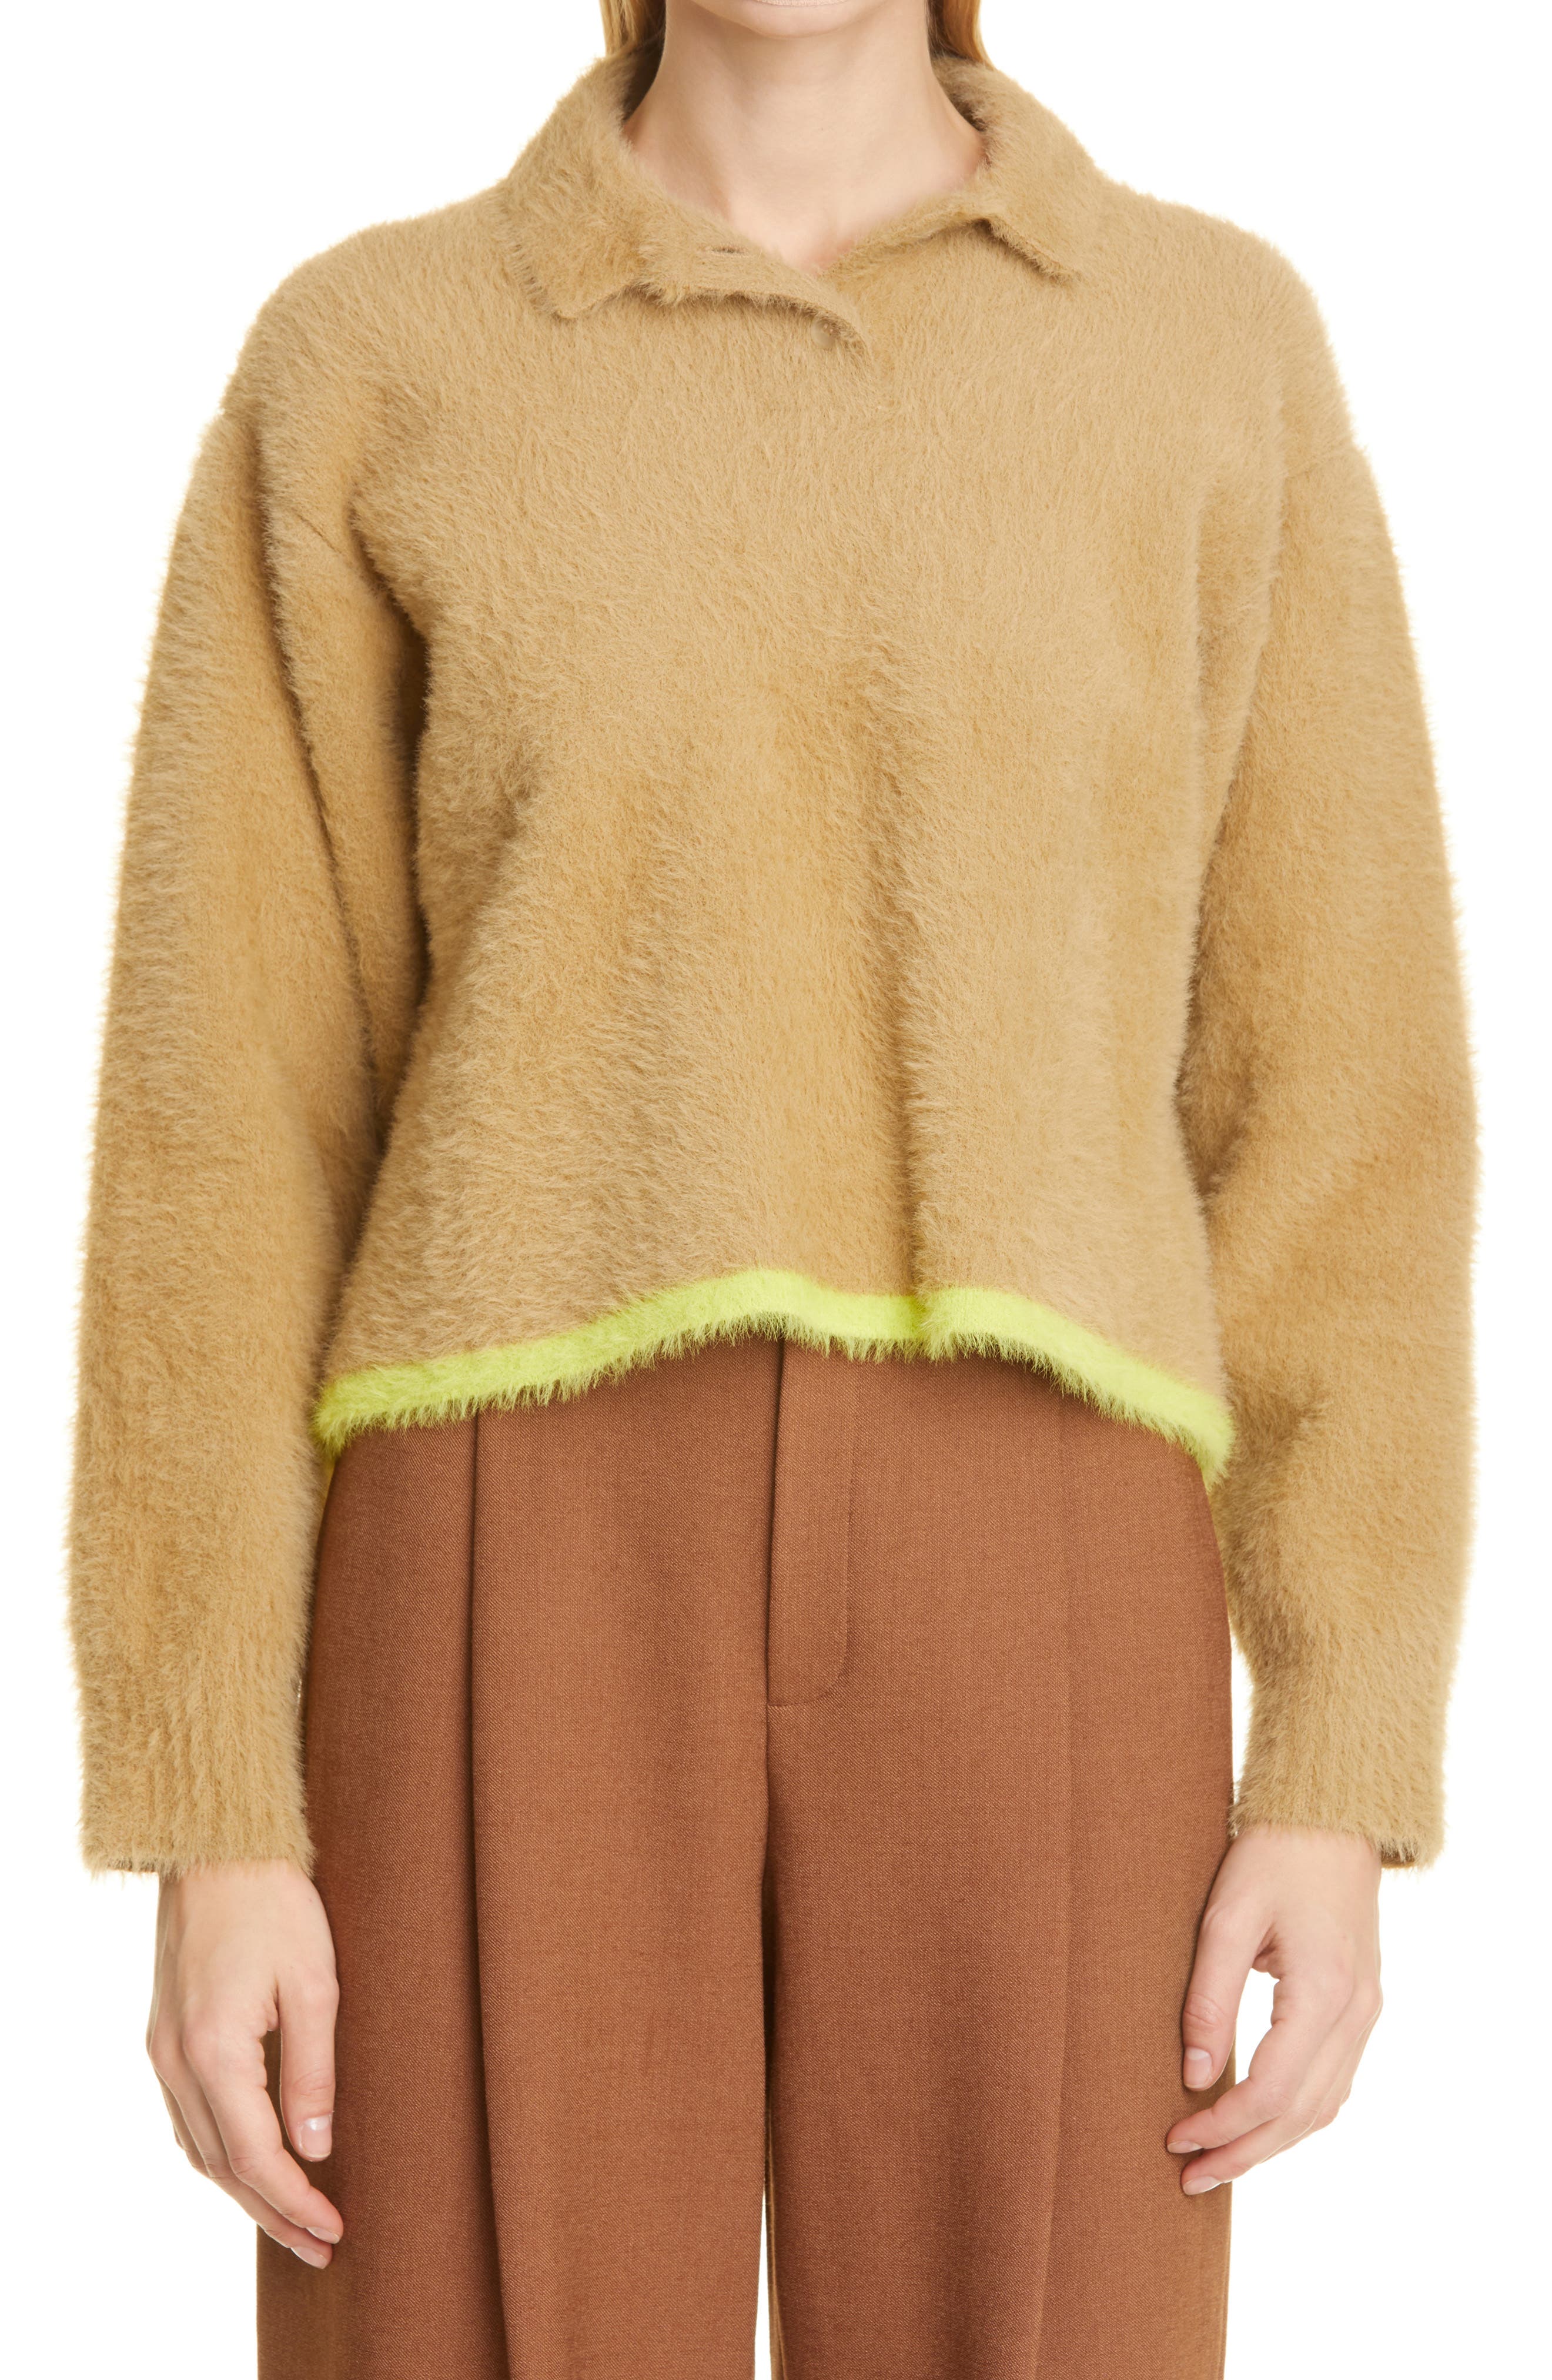 Jacquemus Le Polo Neve Sweater in Beige at Nordstrom, Size 8 Us